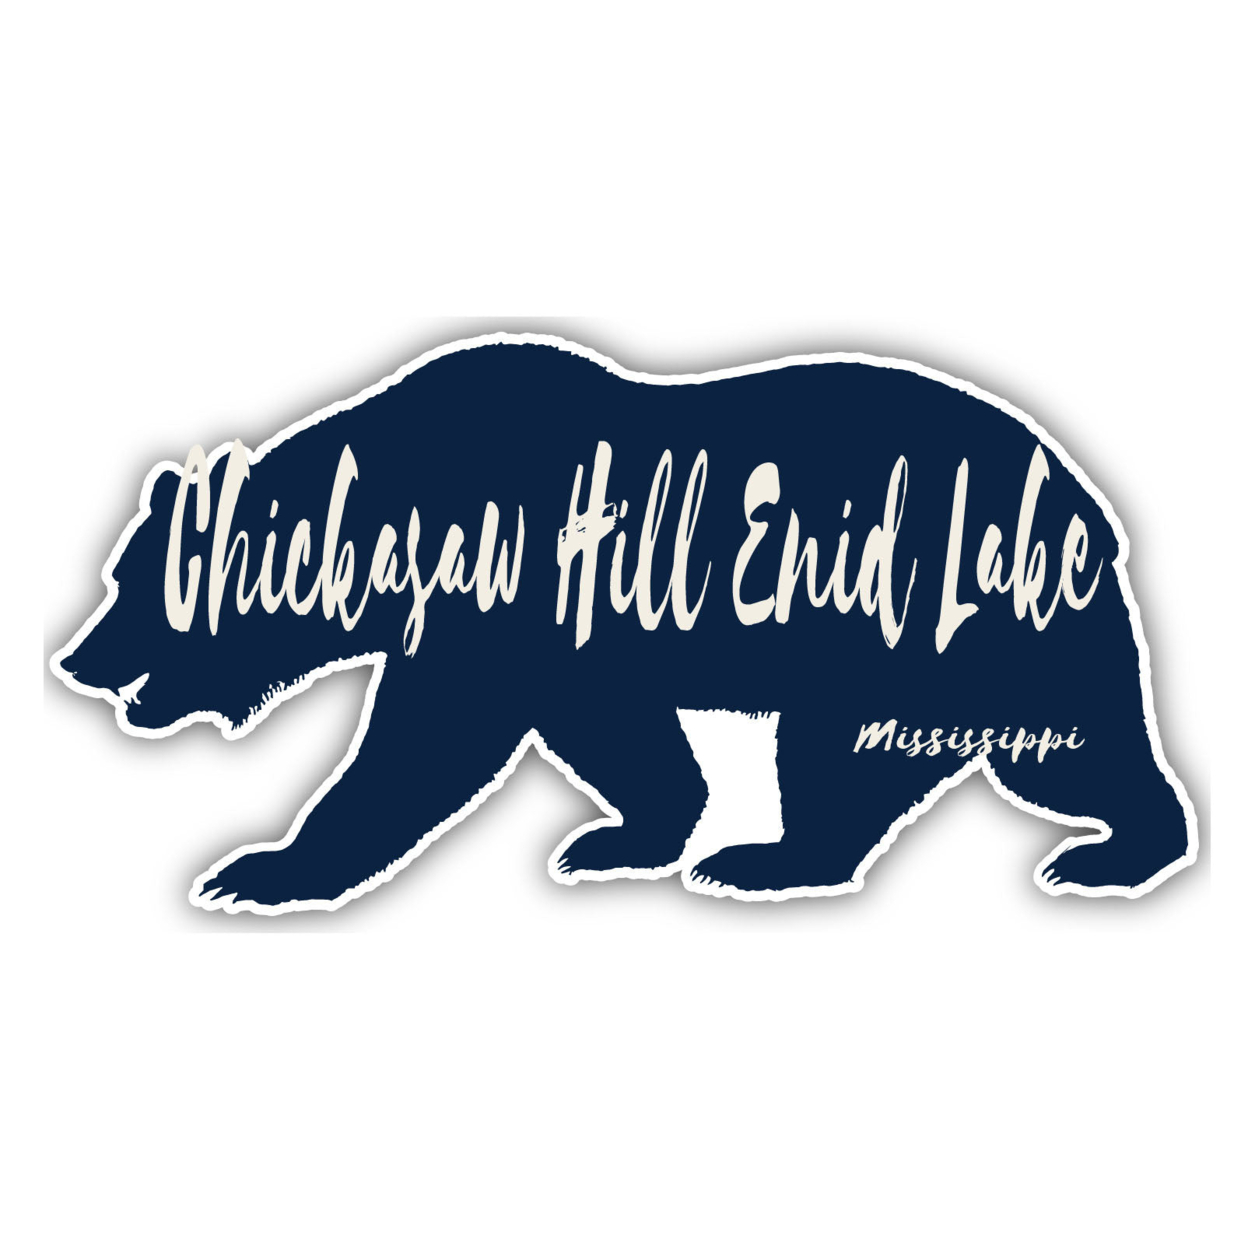 Chickasaw Hill Enid Lake Mississippi Souvenir Decorative Stickers (Choose Theme And Size) - Single Unit, 10-Inch, Bear